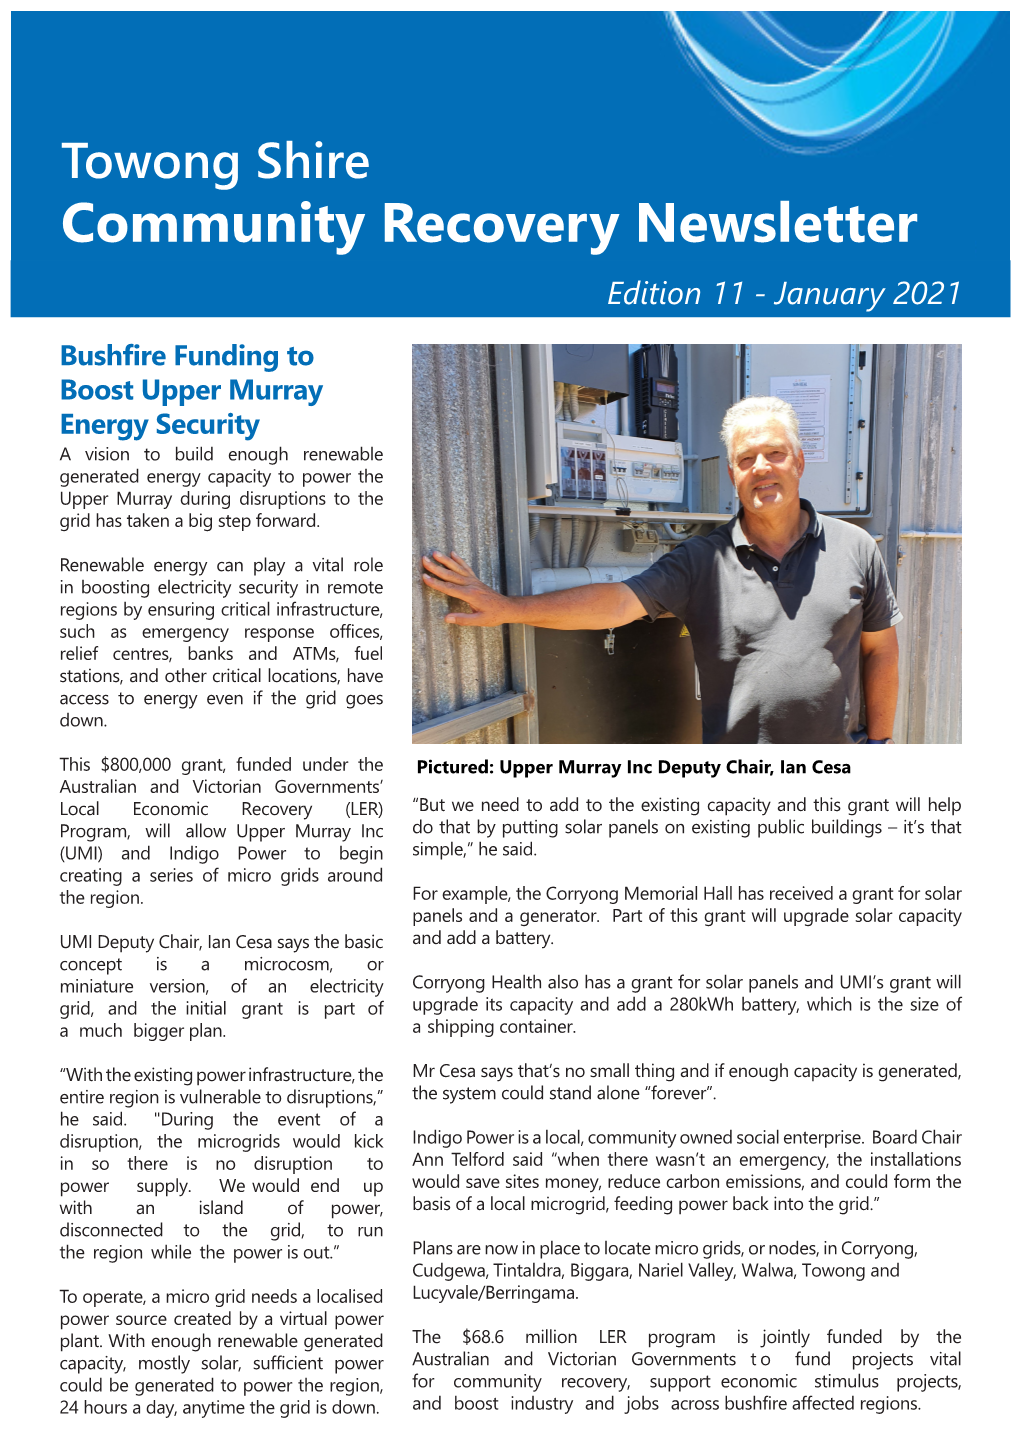 Towong Shire Community Recovery Newsletter Edition 11 - January 2021